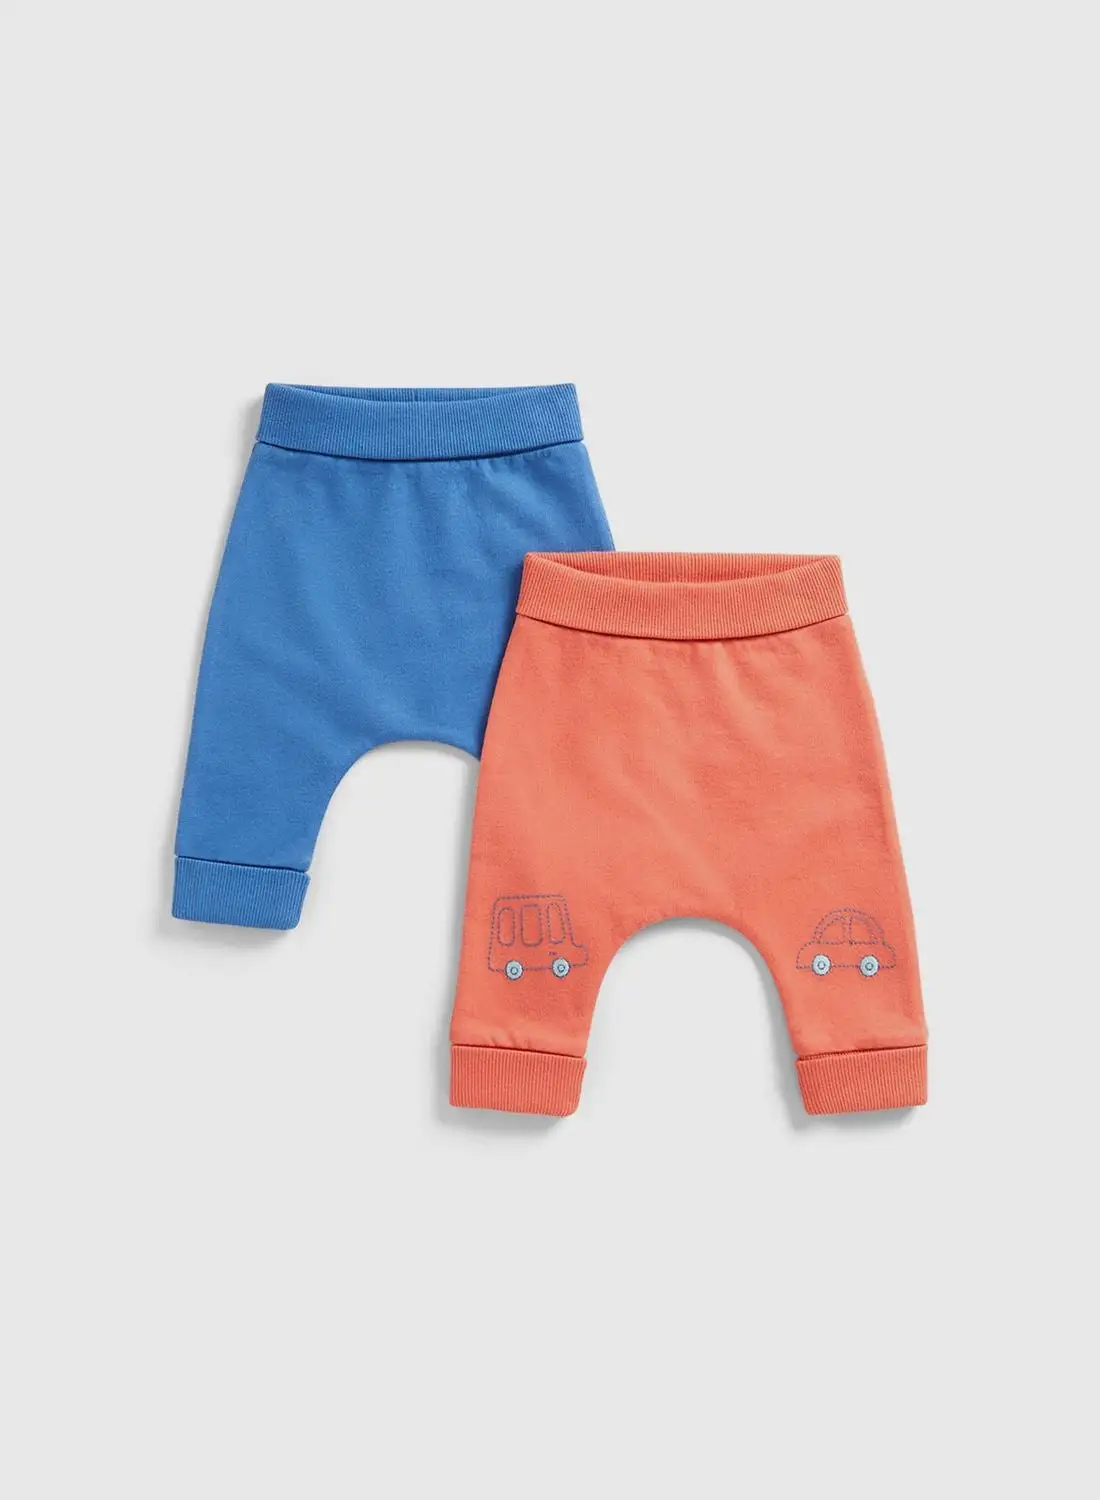 mothercare Kids 2 Pack Essential Sweatpants